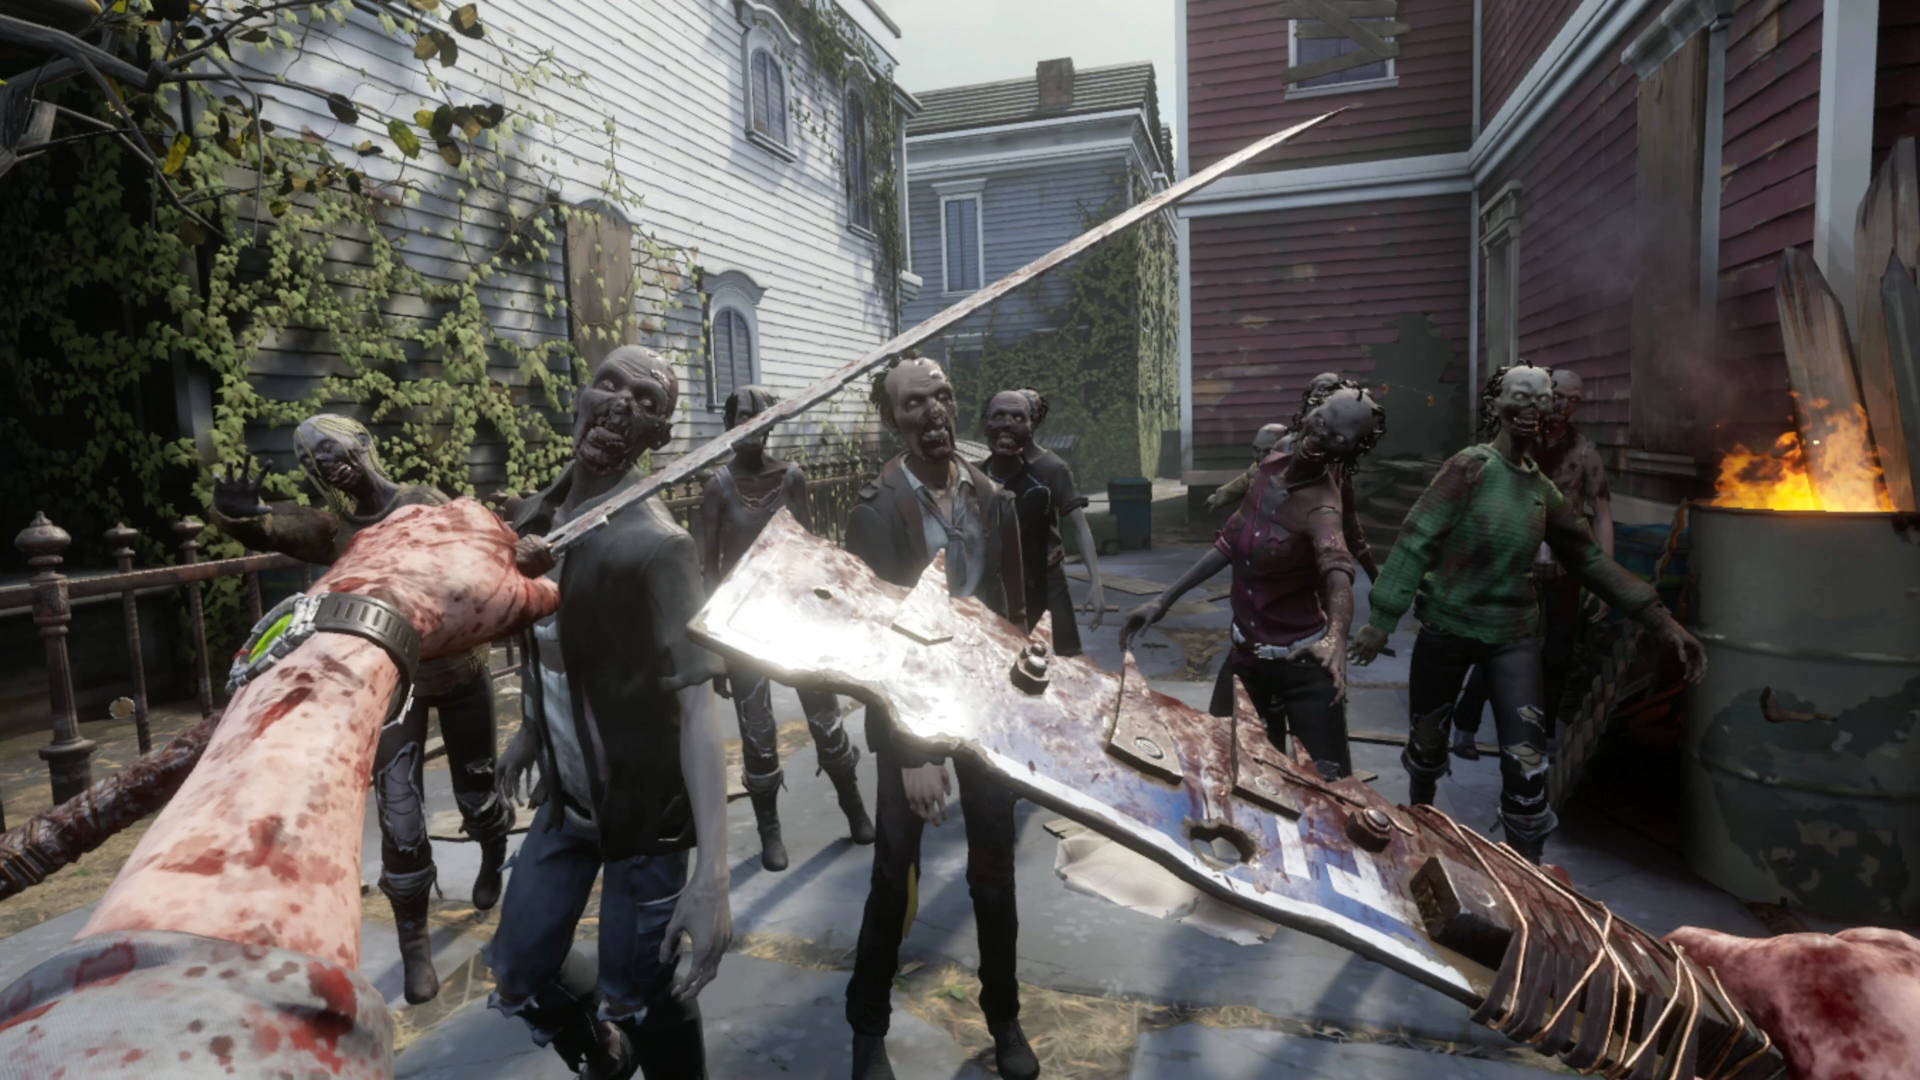 Best VR games - a survivor with two machettes facing off against a horde of zombies.